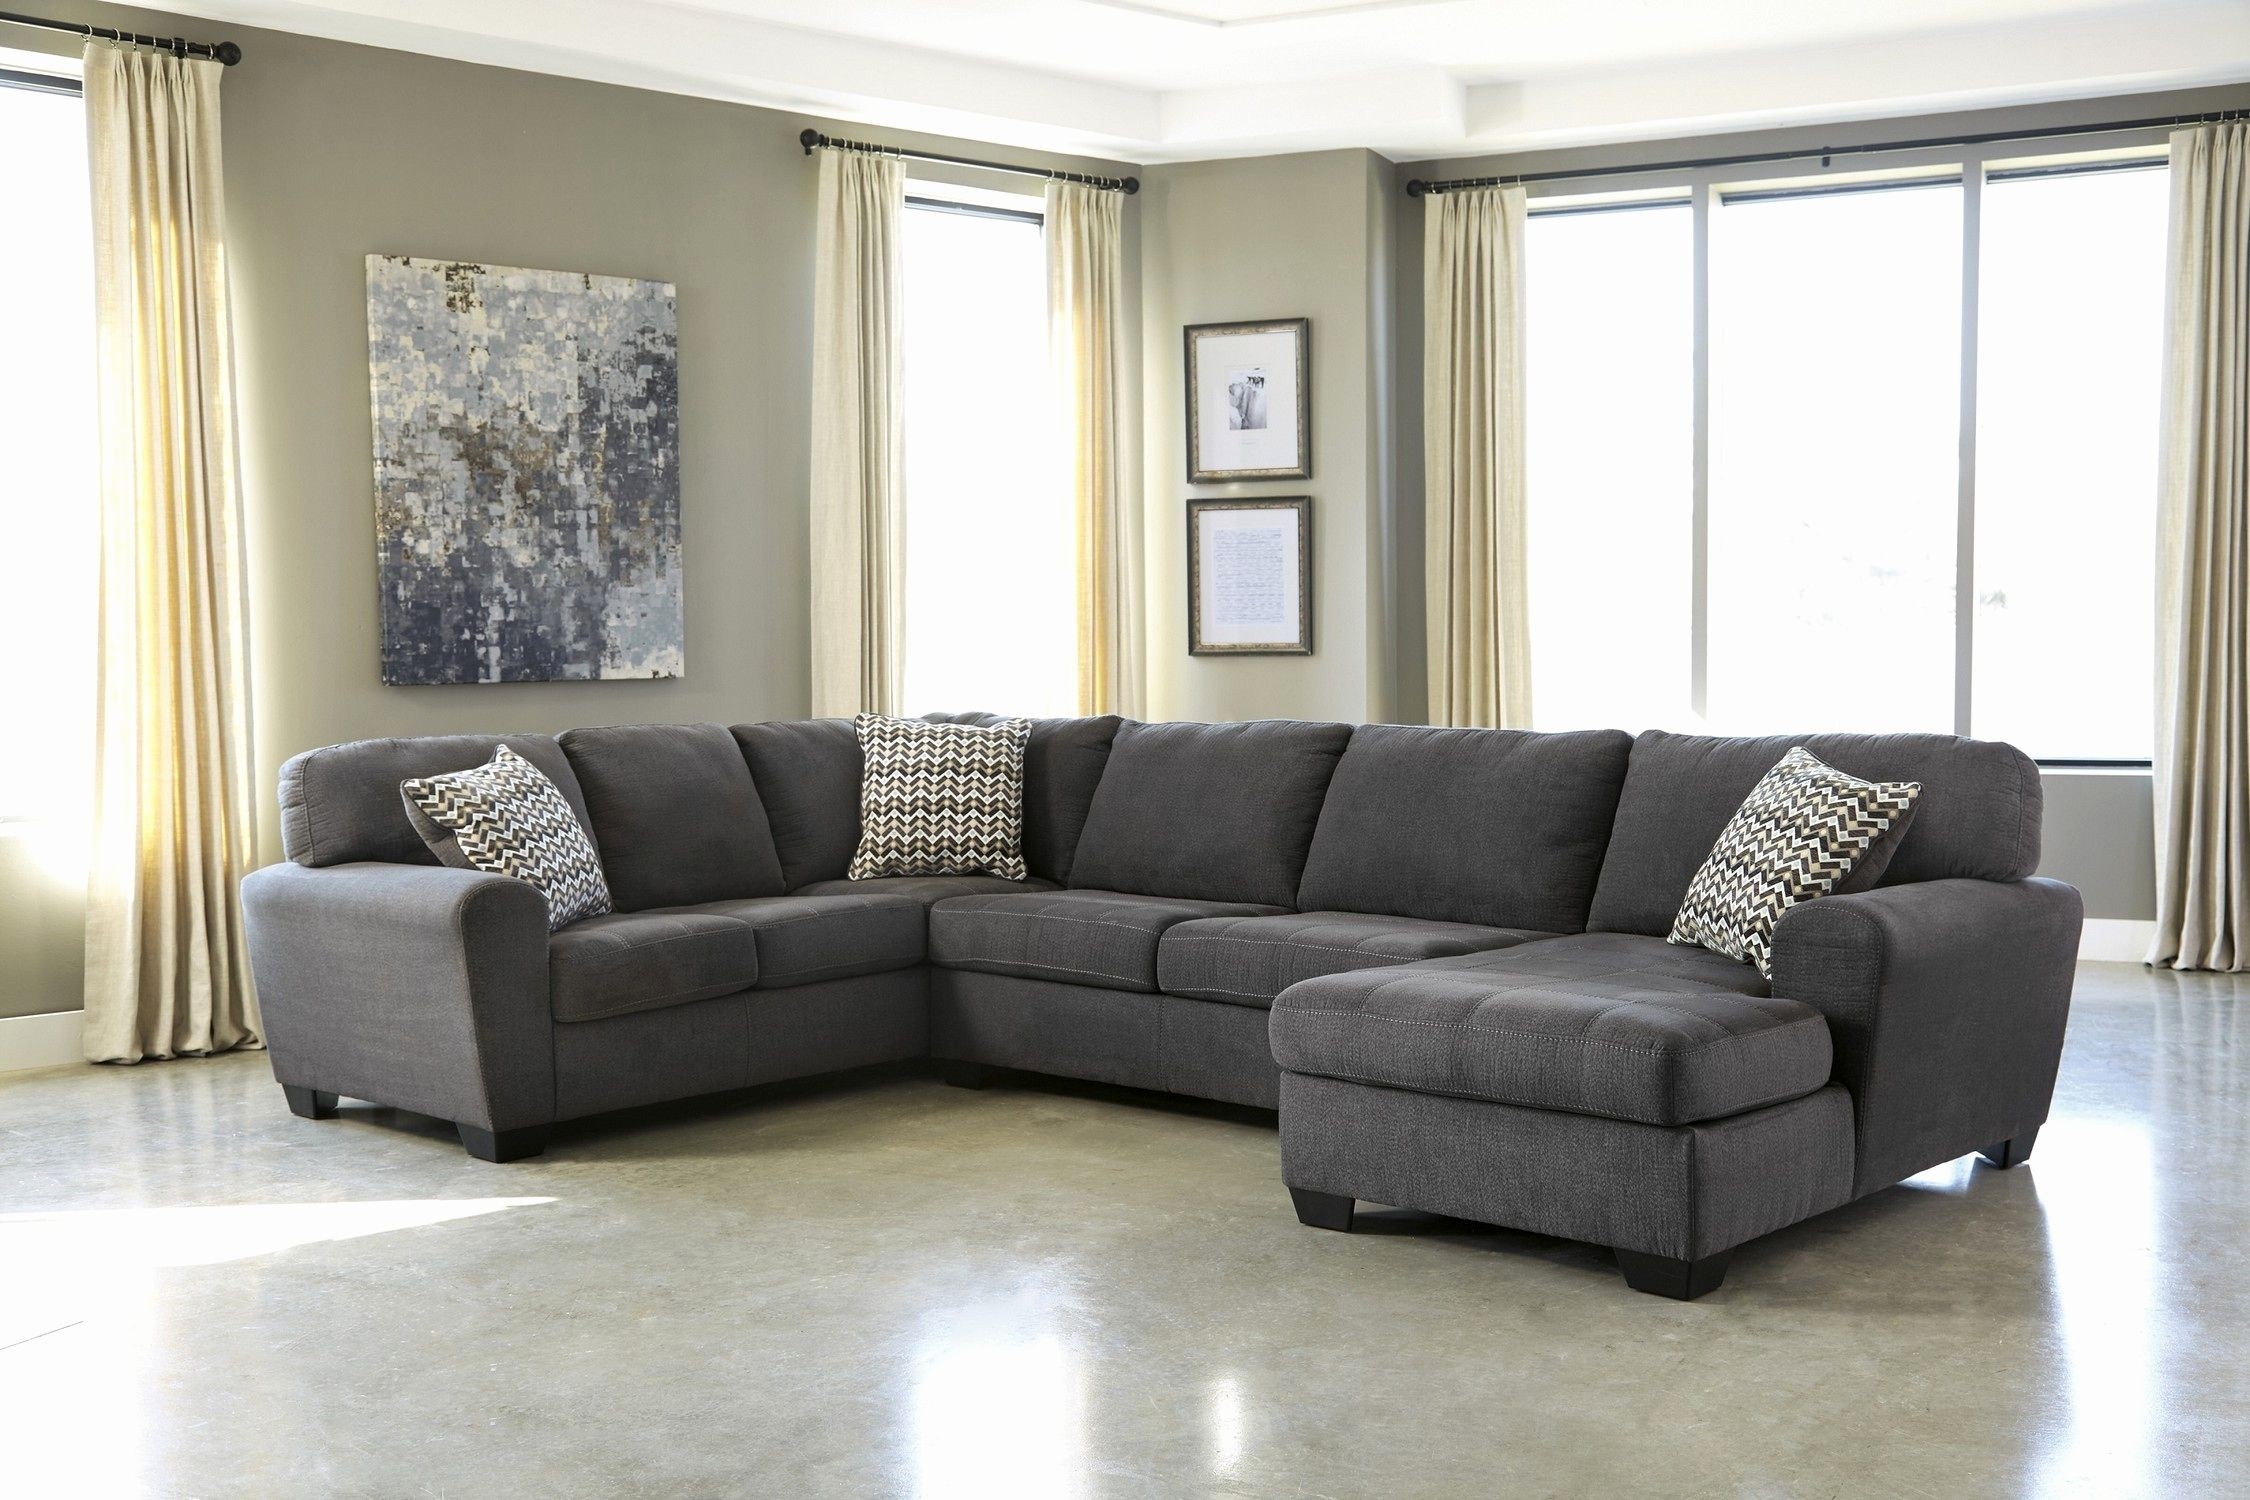 Elegant charcoal gray sectional sofa picture modern sofa